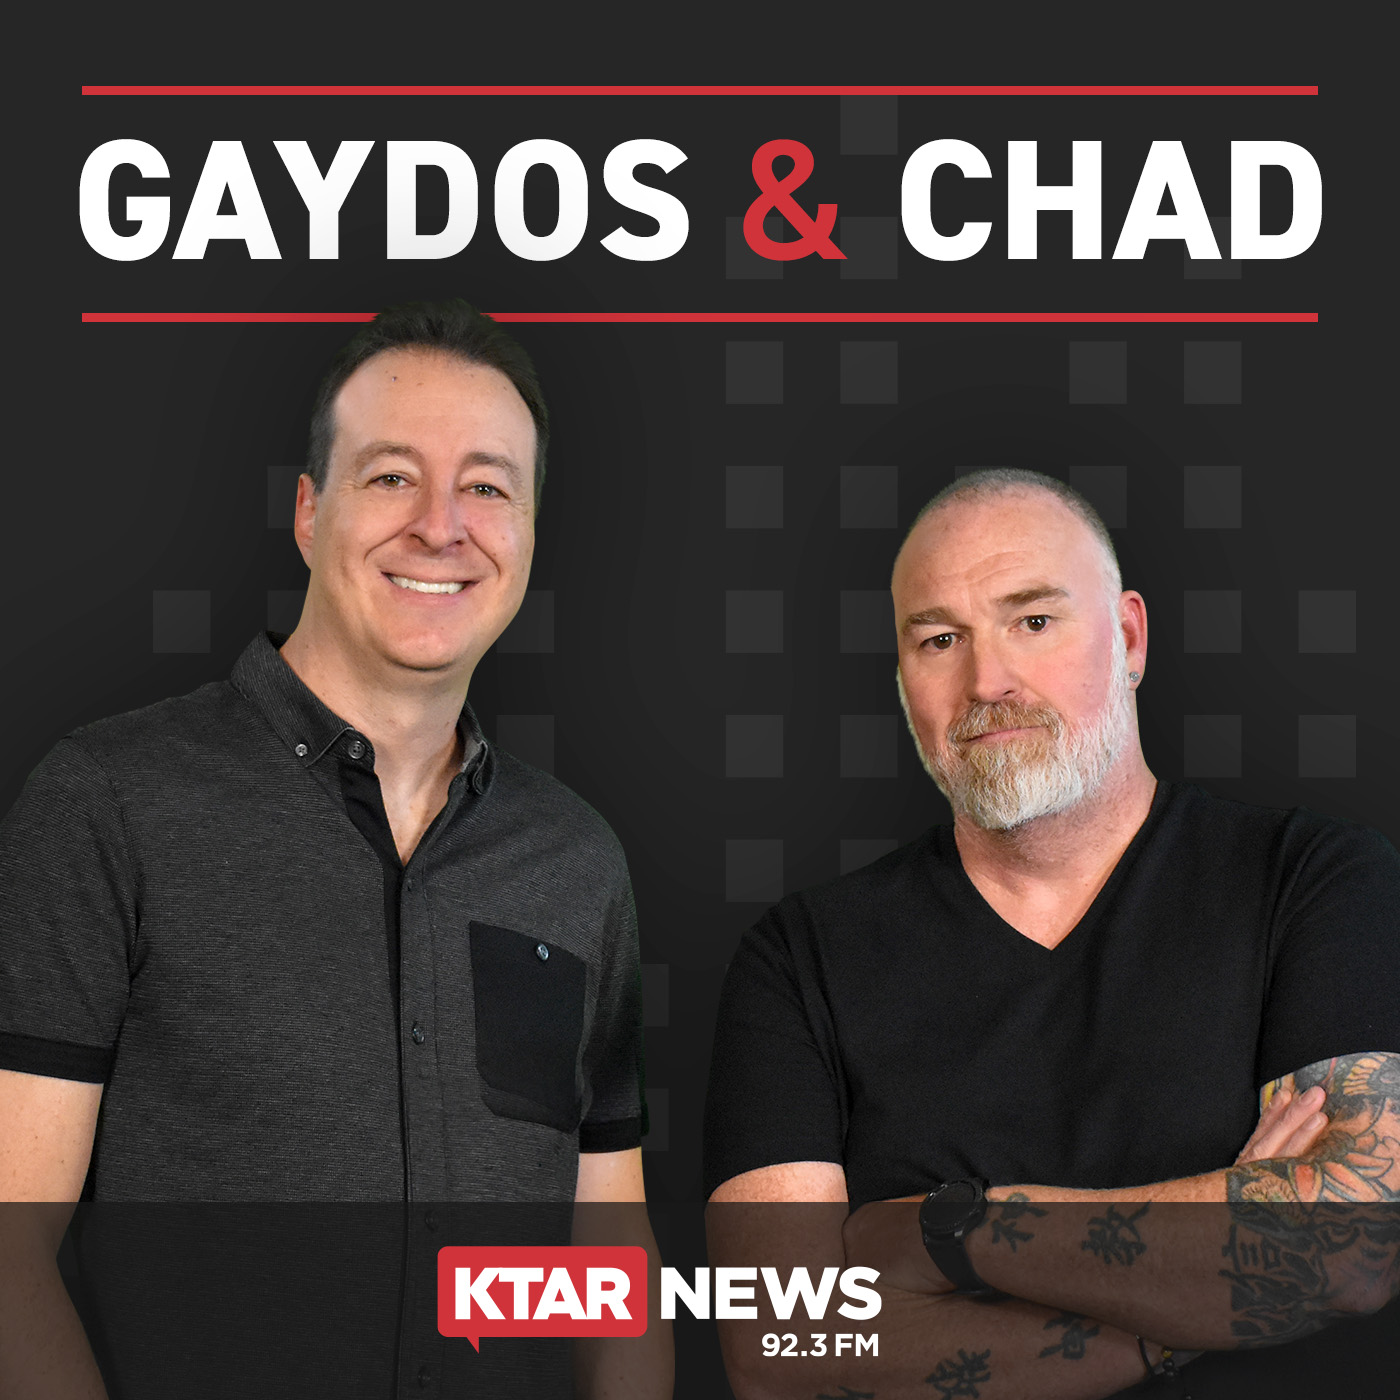 The Gaydos and Chad Show